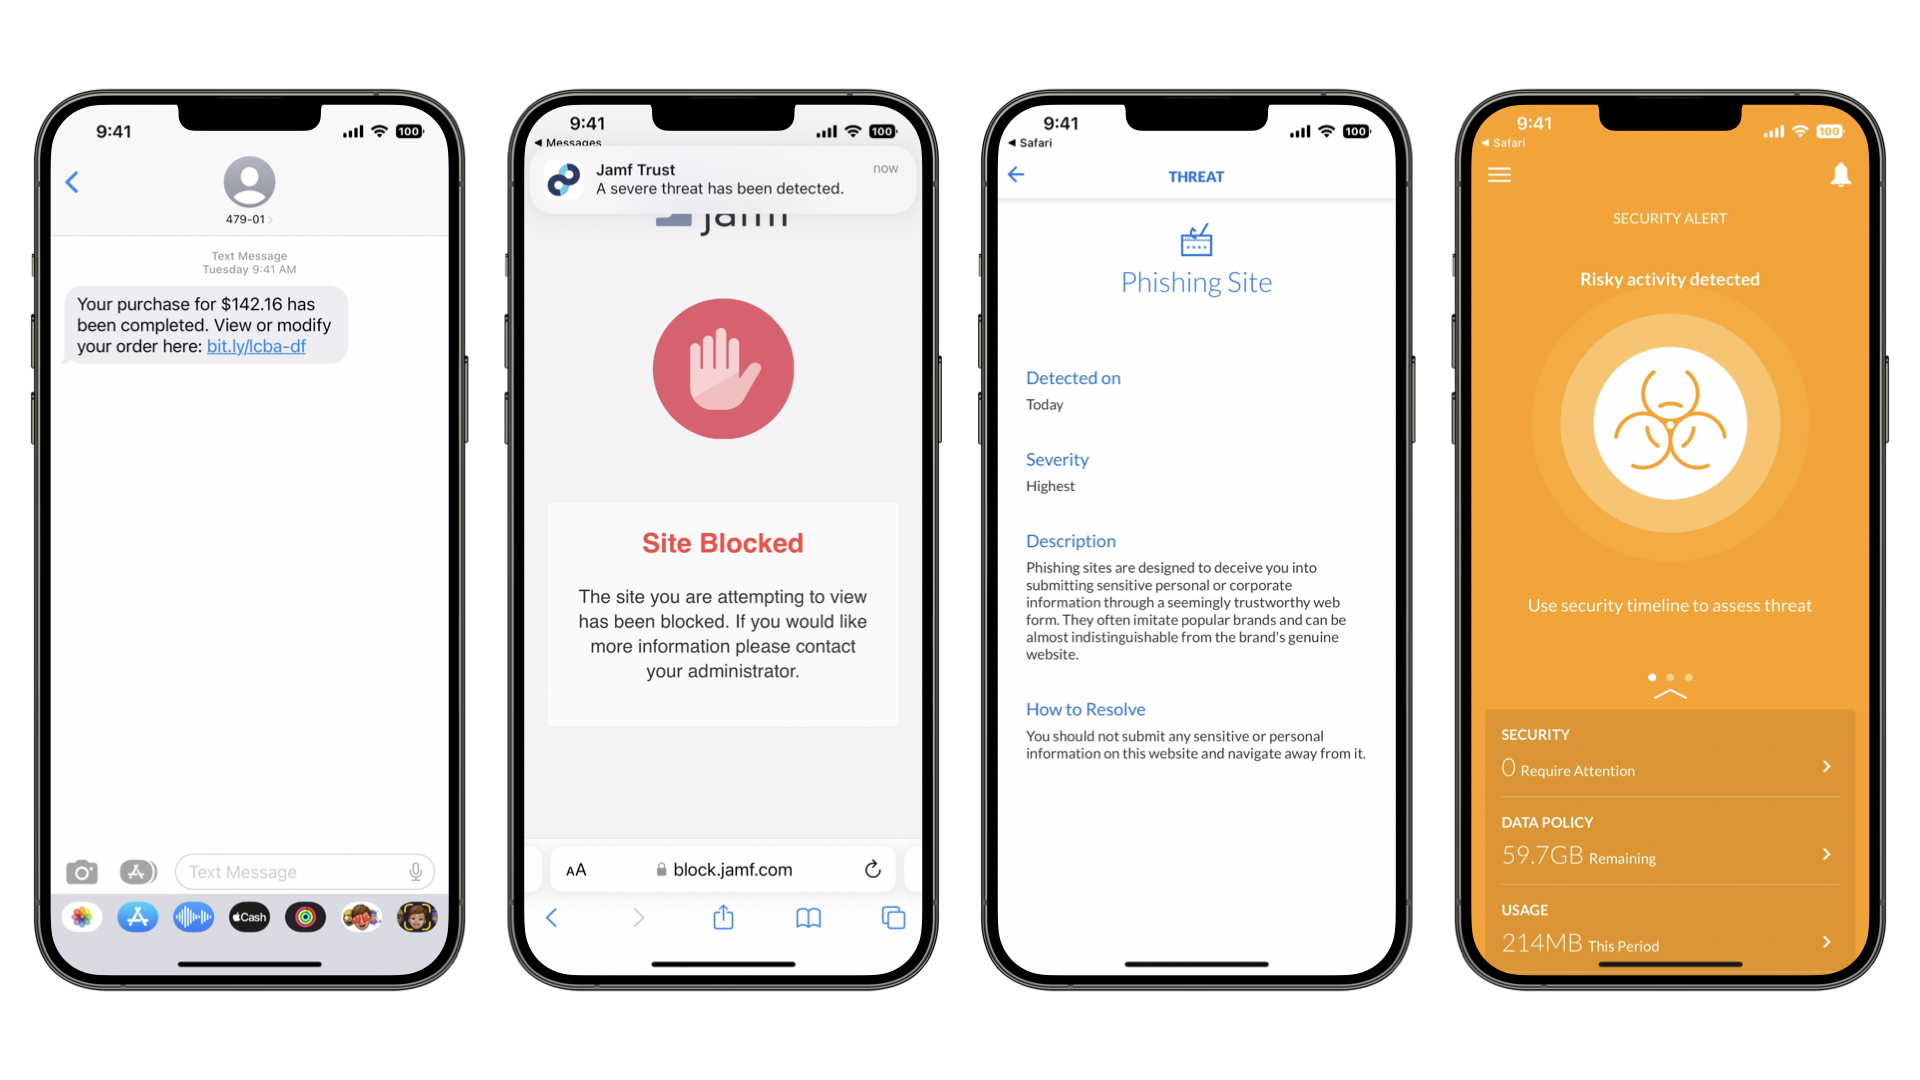 Jamf Trust in action: on iPhone screens: 1. a text message with a link and urgent message. 2. a notice that the site is blocked. 3. notification that it is a phishing site 4. security alert and next steps instructions